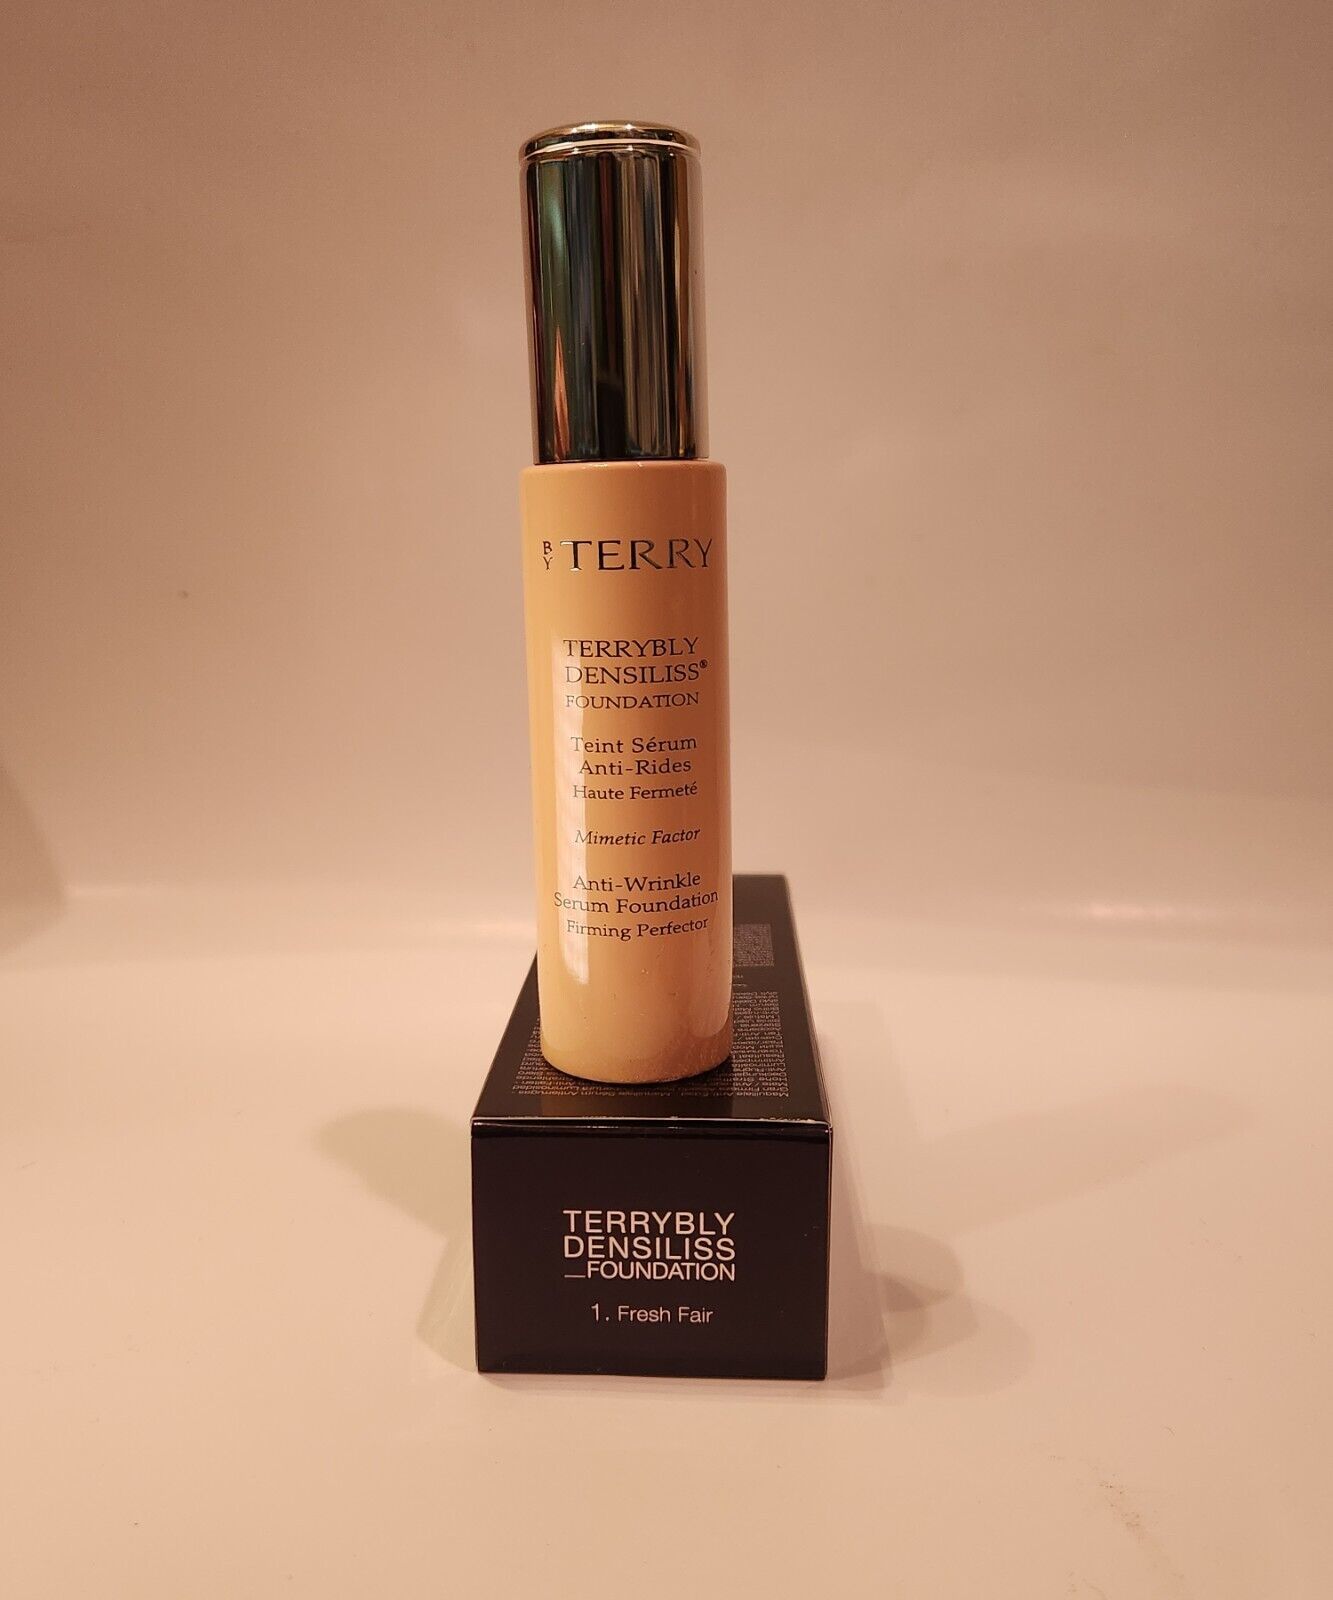 Primary image for By Terry Terrybly Densiliss Foundation: 1. Fresh Fair, 1fl. oz.